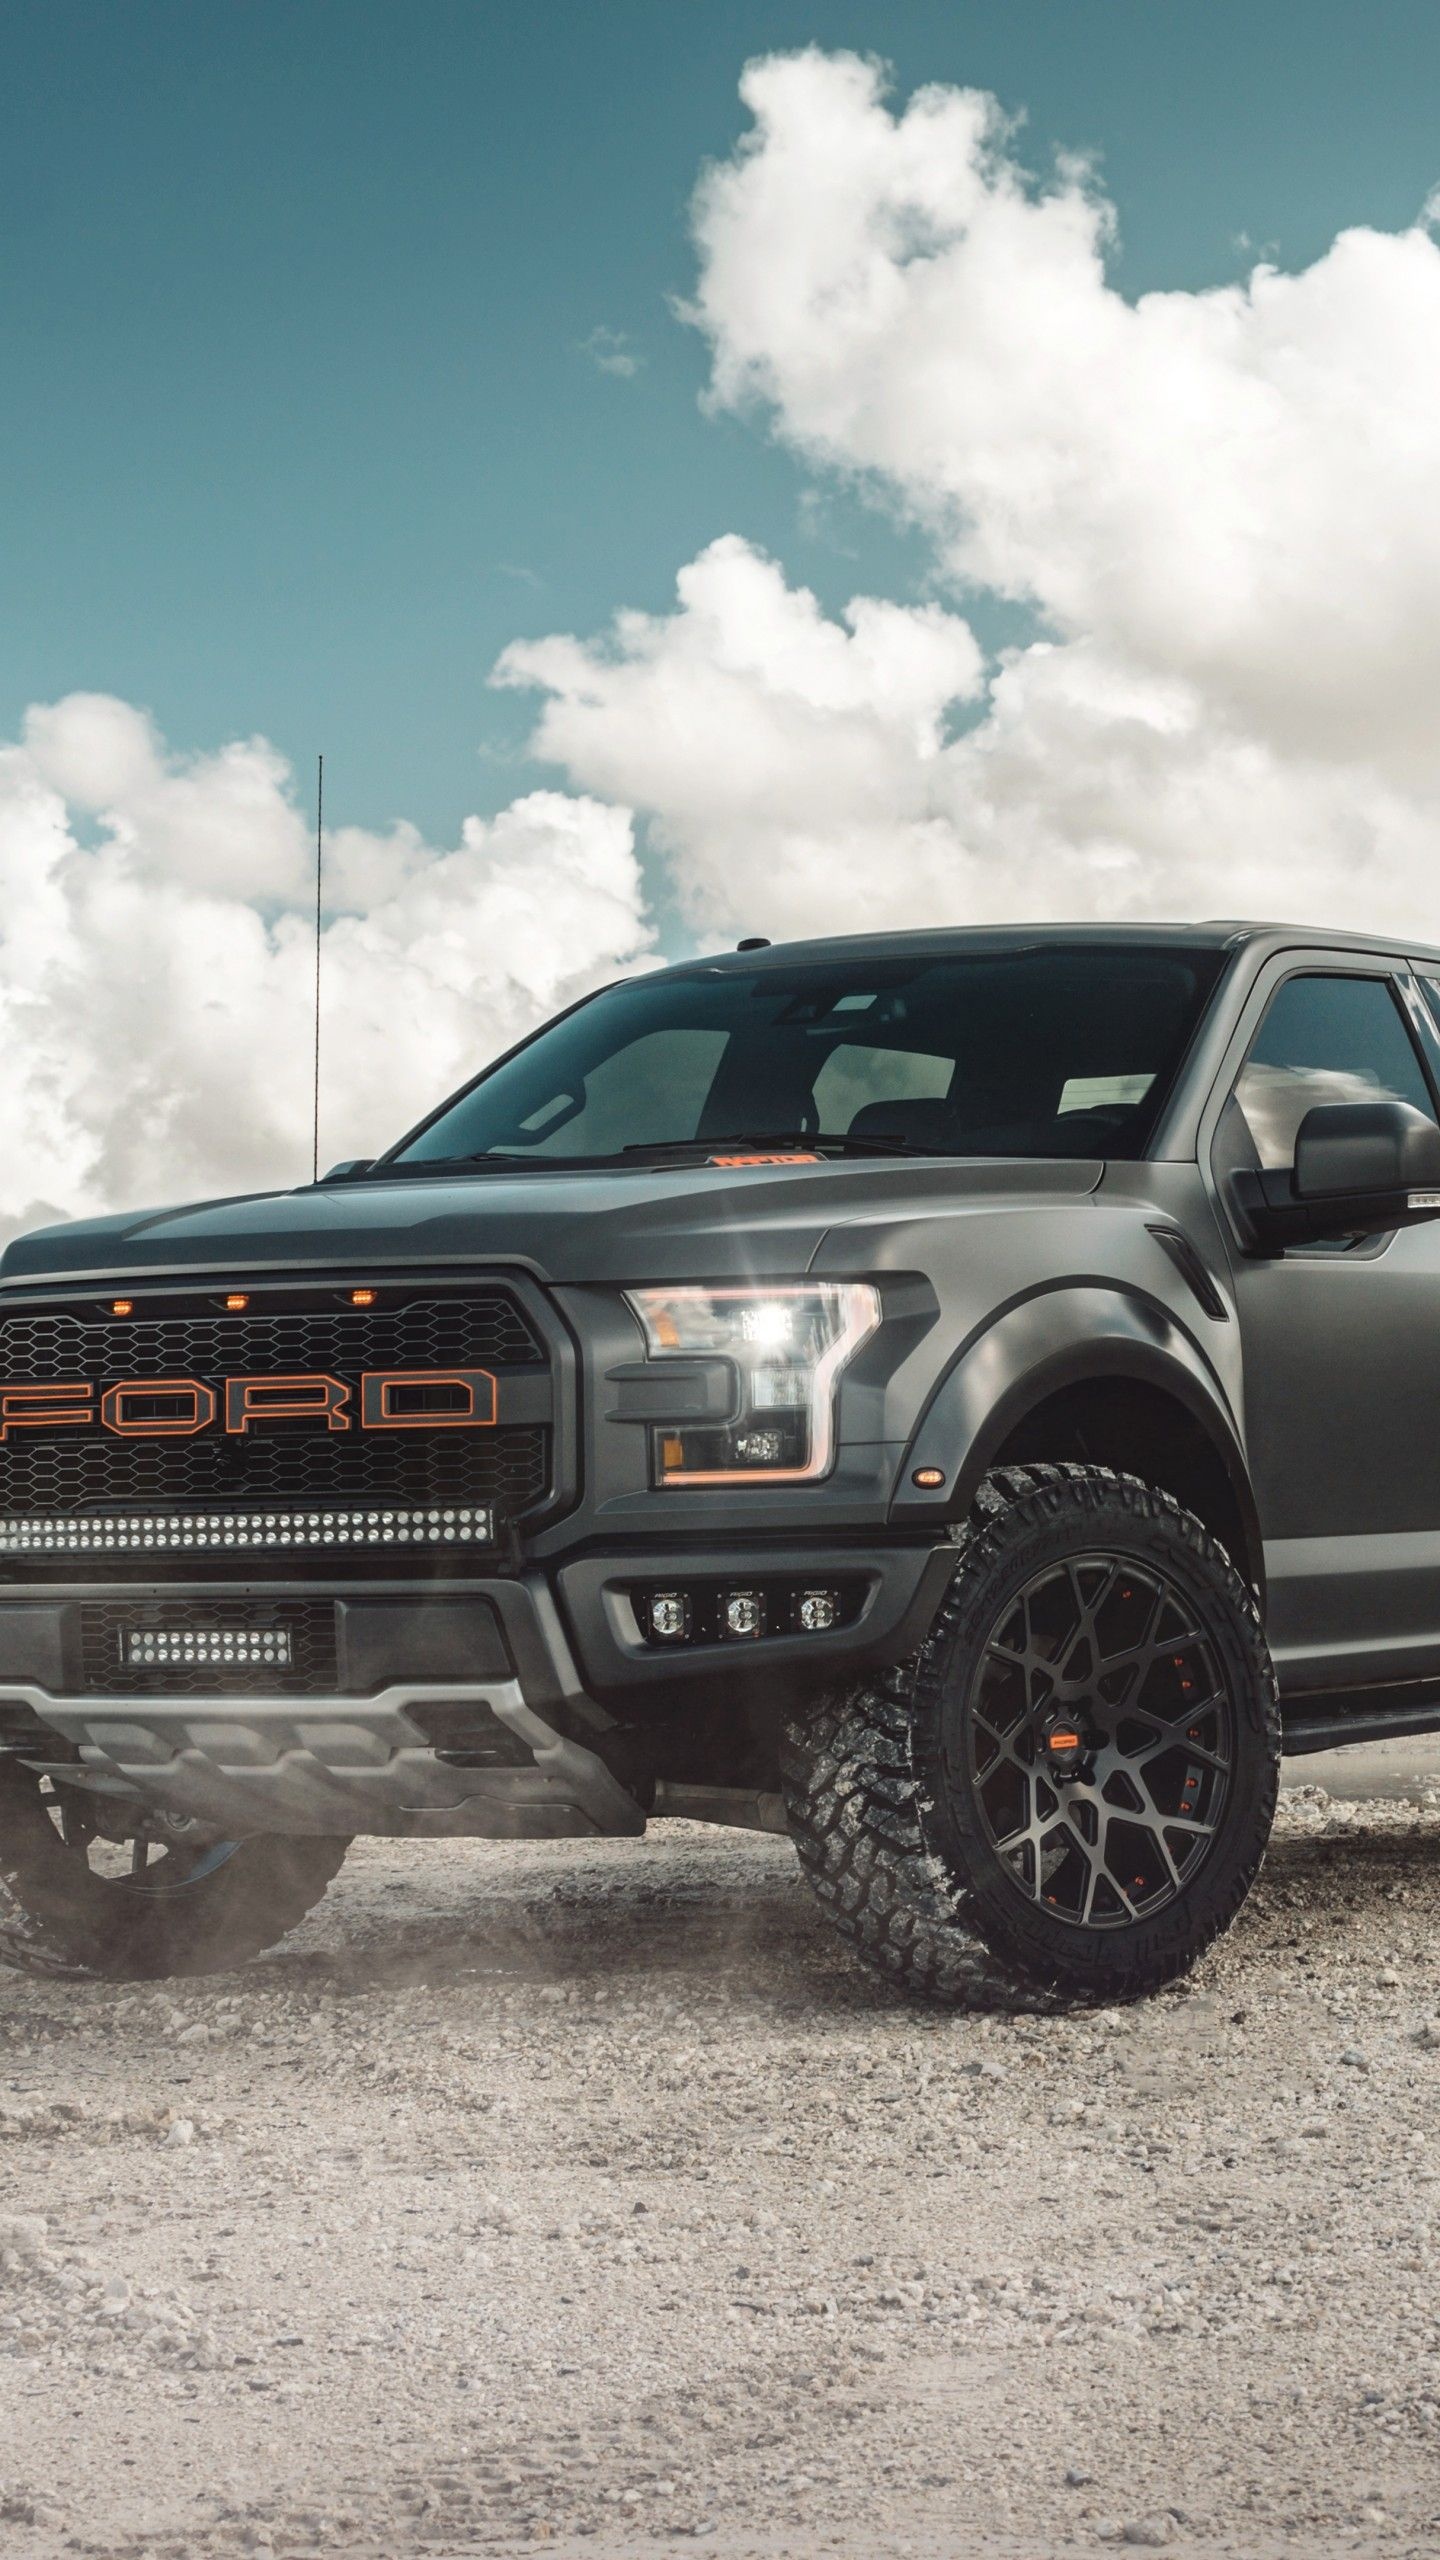 Ford F-150, Black Ford Raptor, Top free, HD backgrounds, 1440x2560 HD Handy